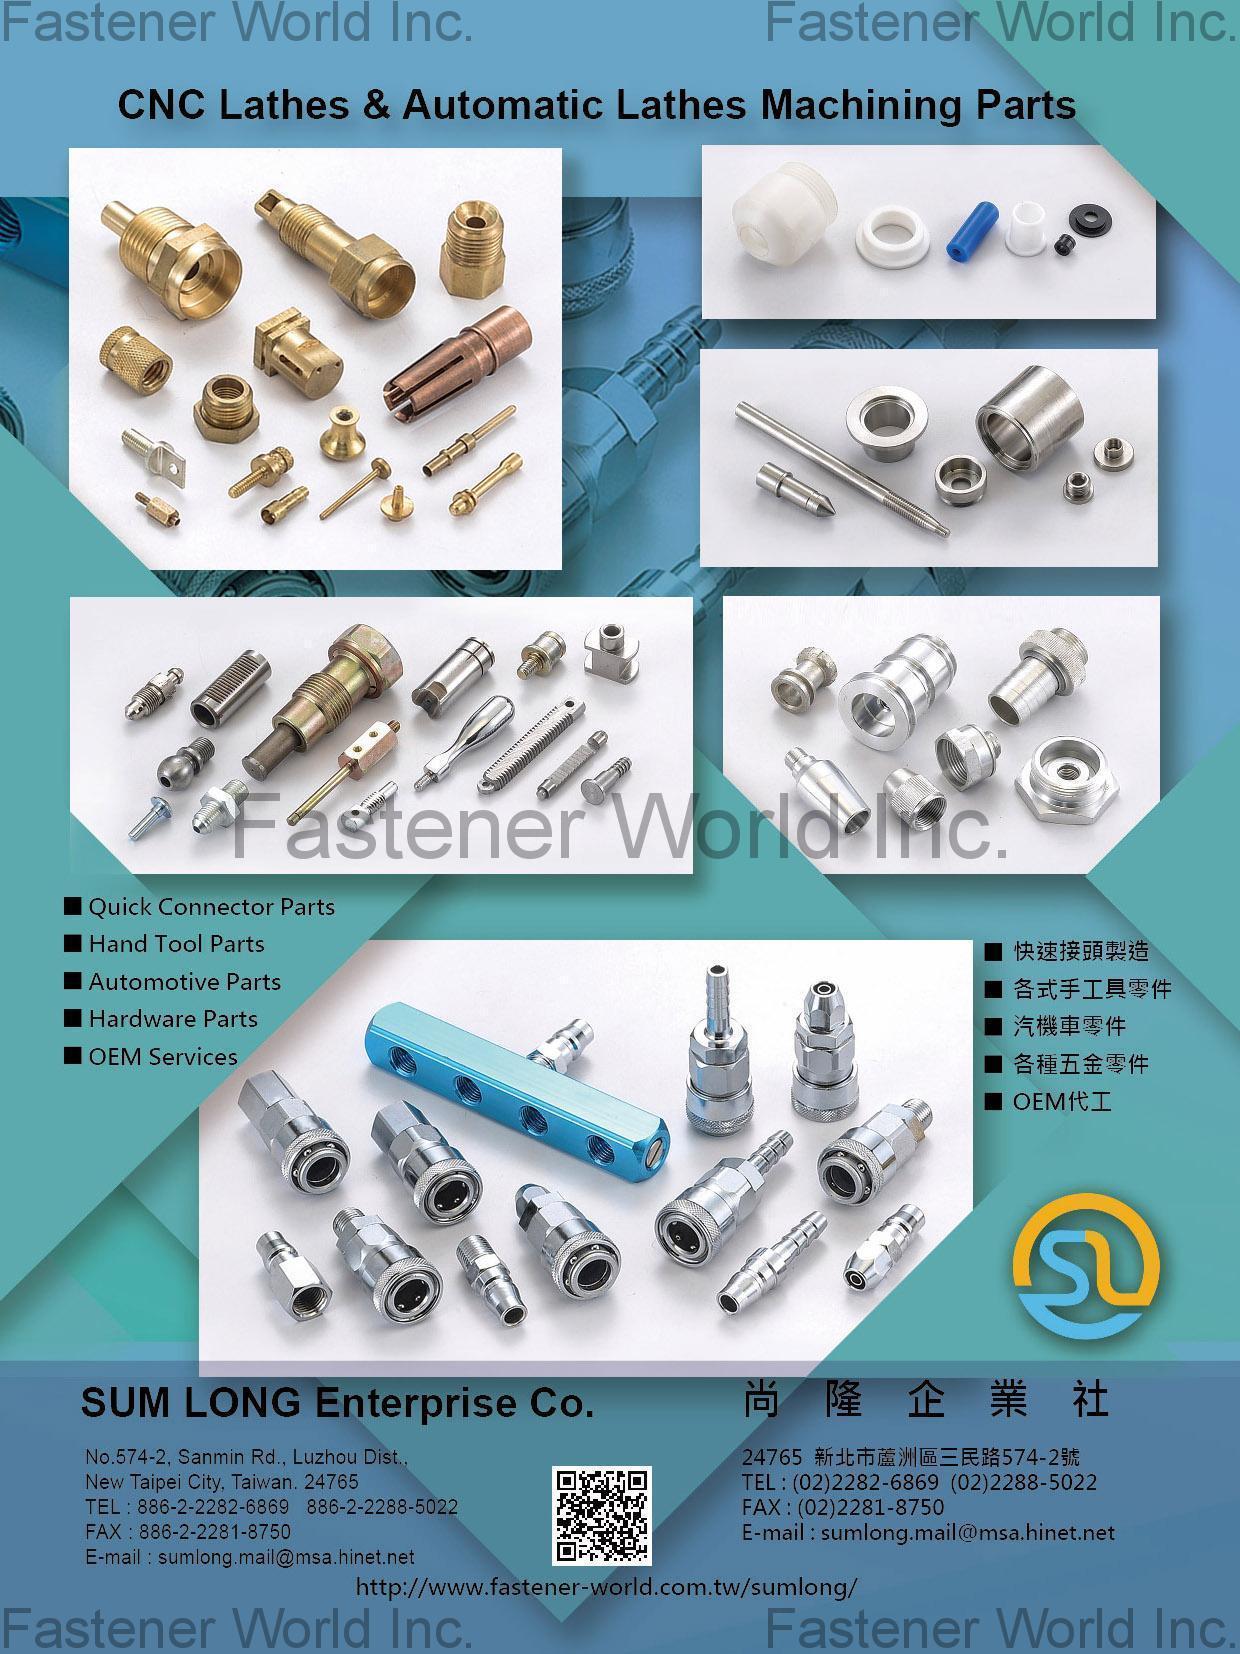 SUM LONG ENTERPRISE CO. , CNC Lathes & Automatic Lathes Machining Parts, Quick Connector Parts, Hand Tool Parts, Hardware Parts, OEM Services , Pipe Fittings For Hydraulic Systems